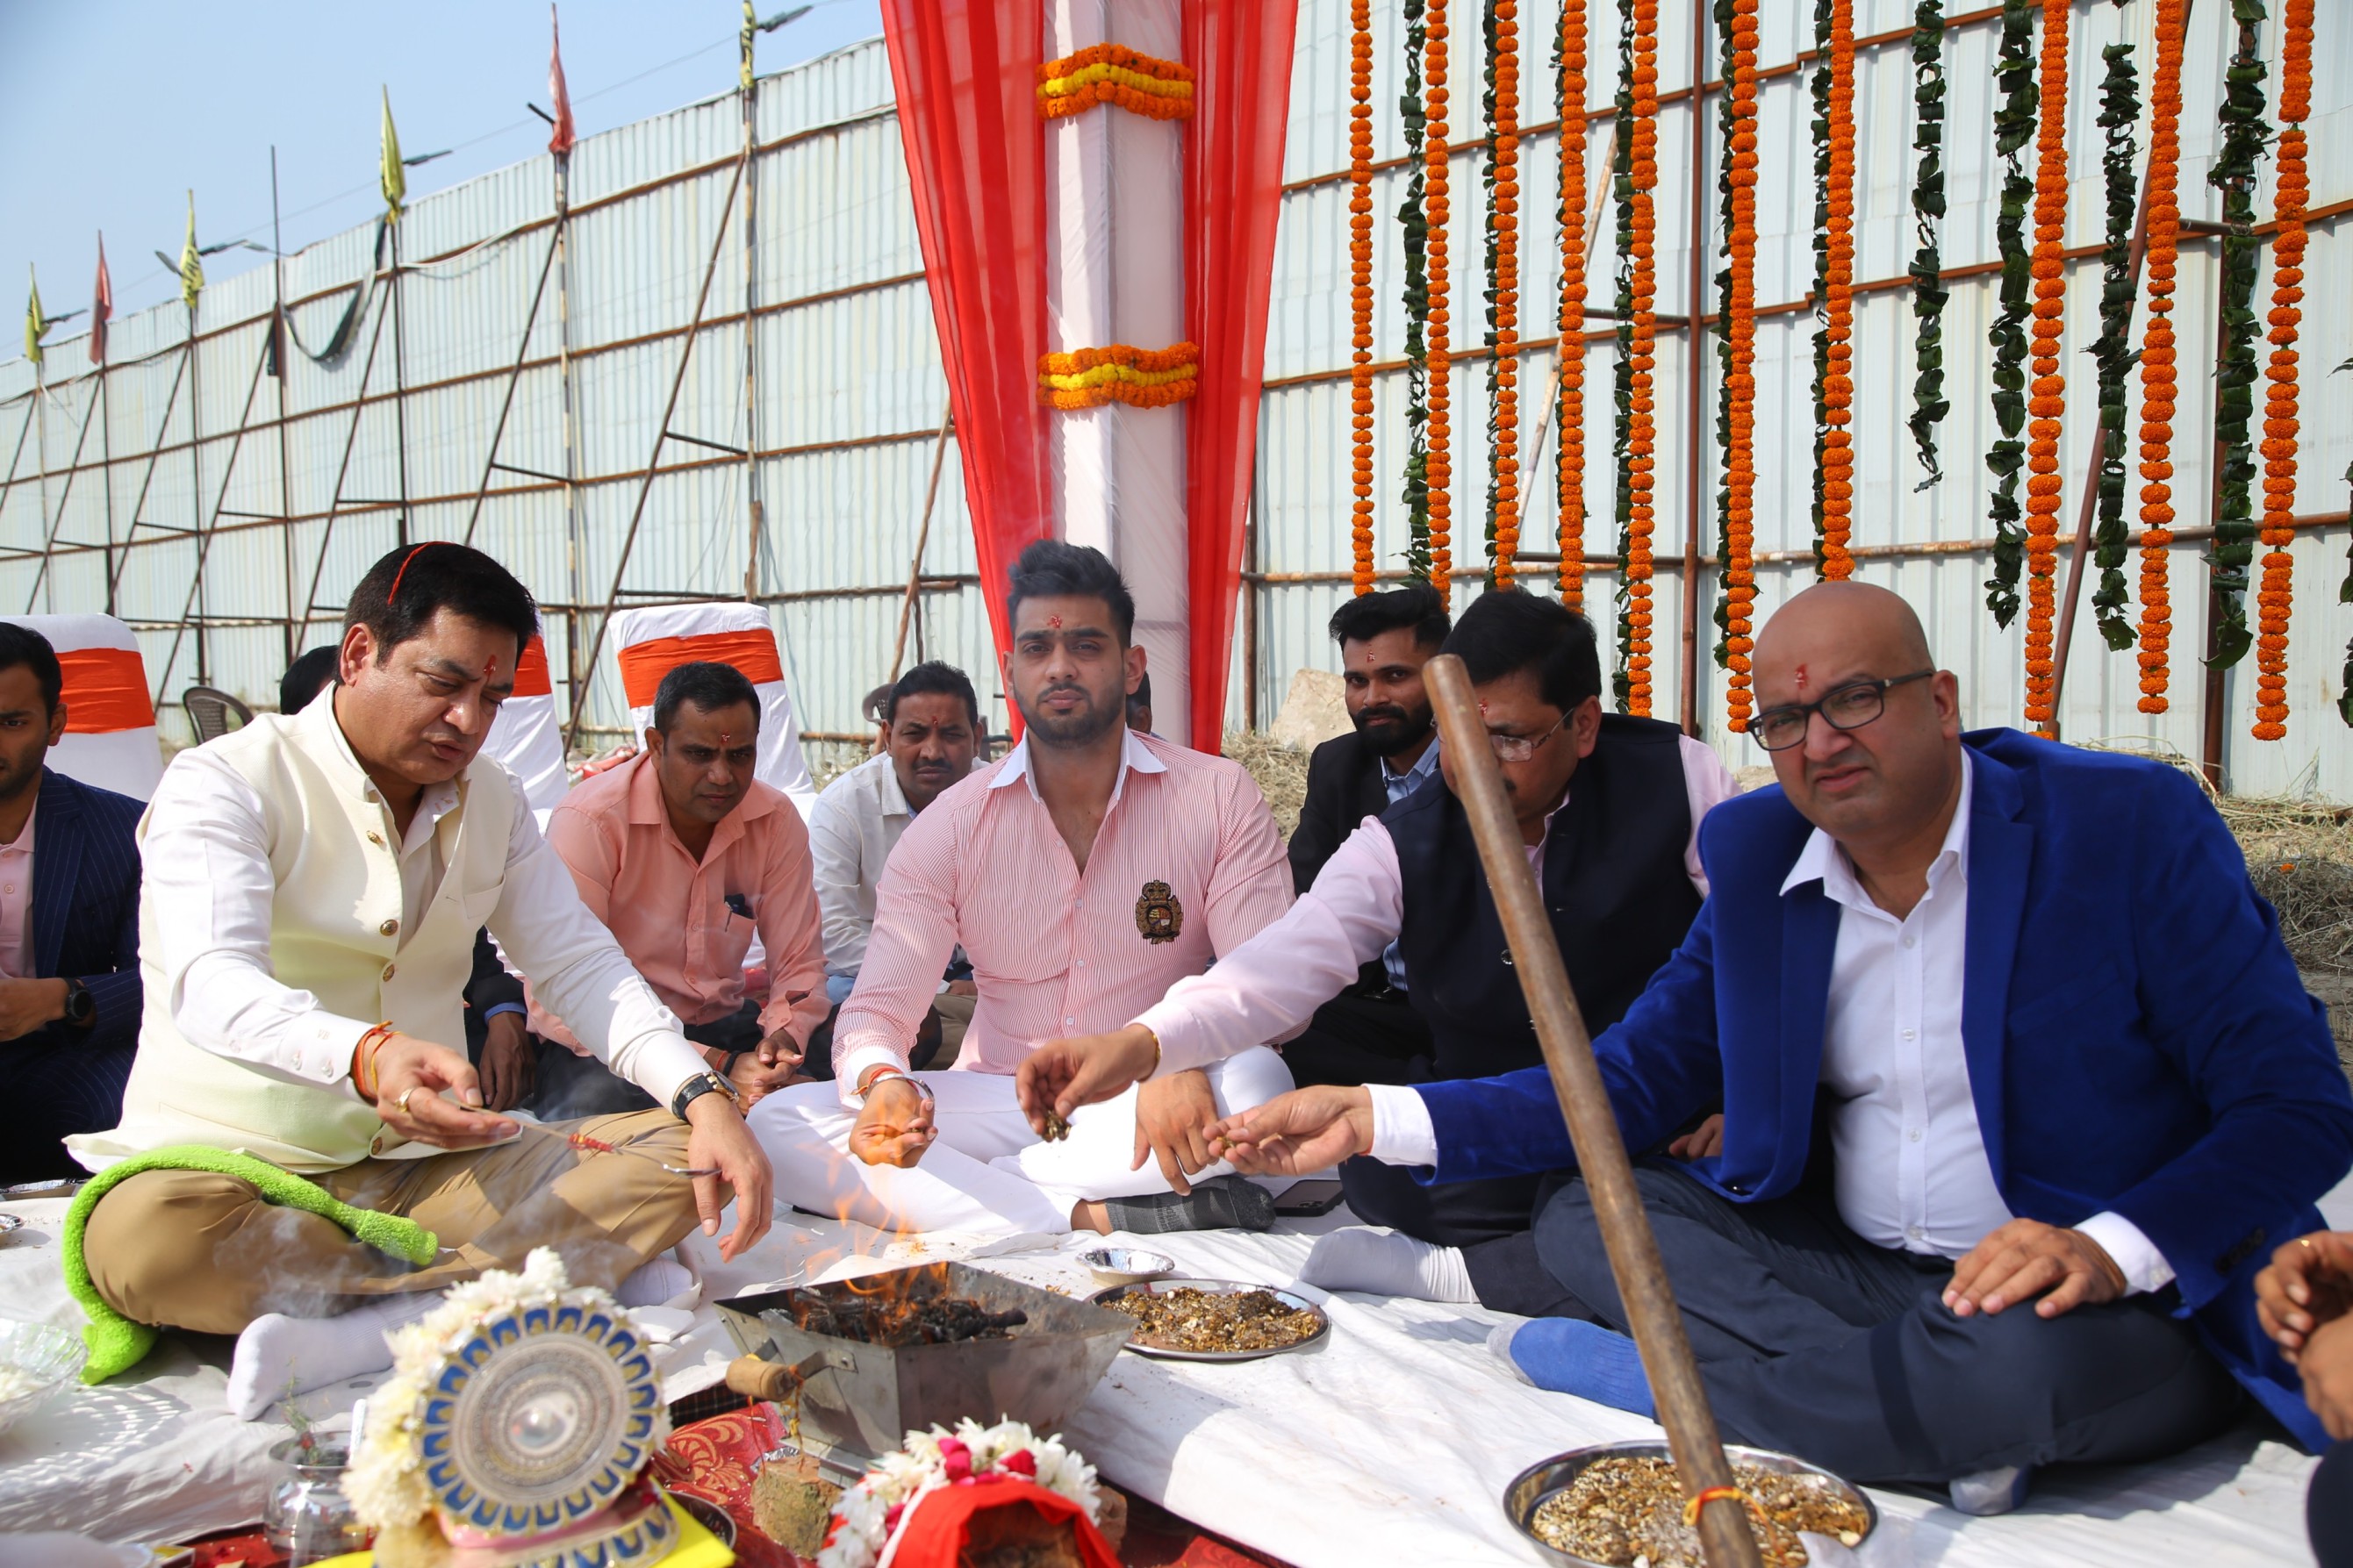 project-detail-introduced-with-bhoomi-poojan-at-the-site-sector131-noida